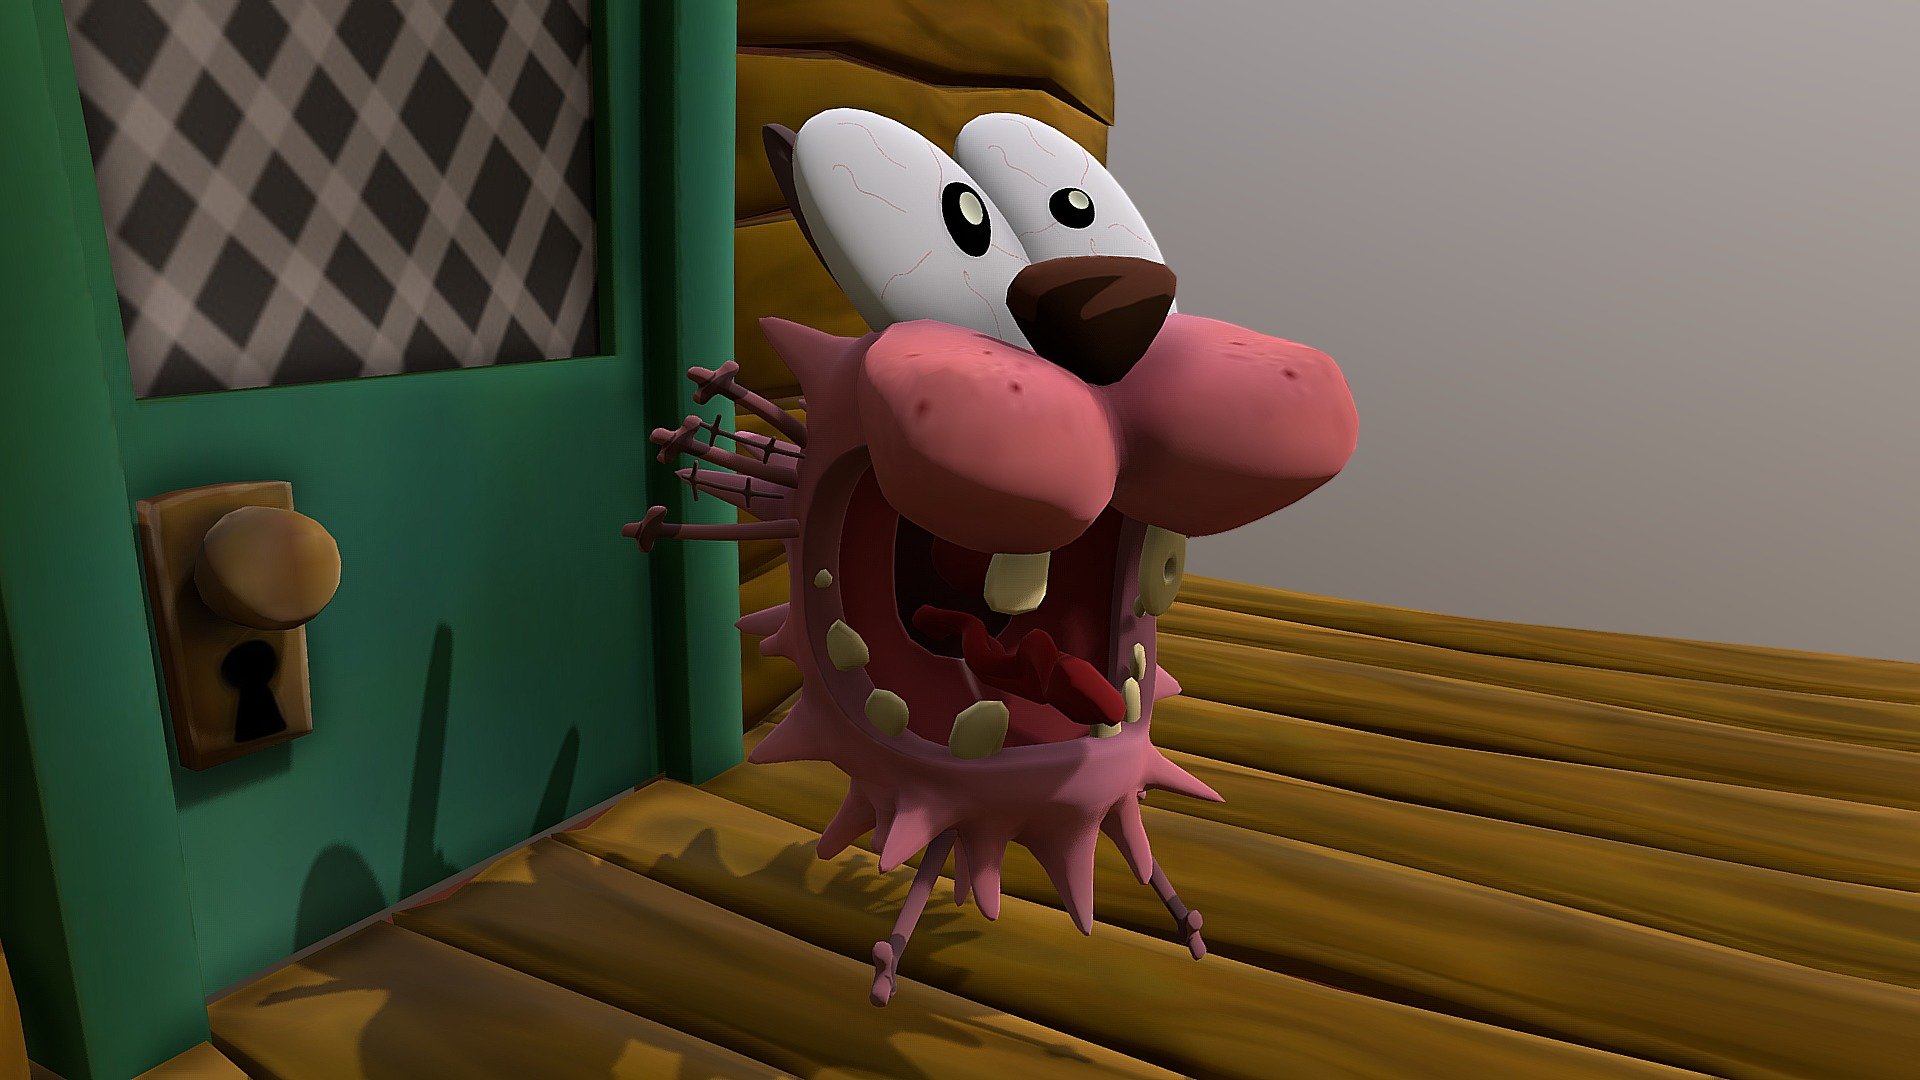 Courage the Cowardly Dog fanmade